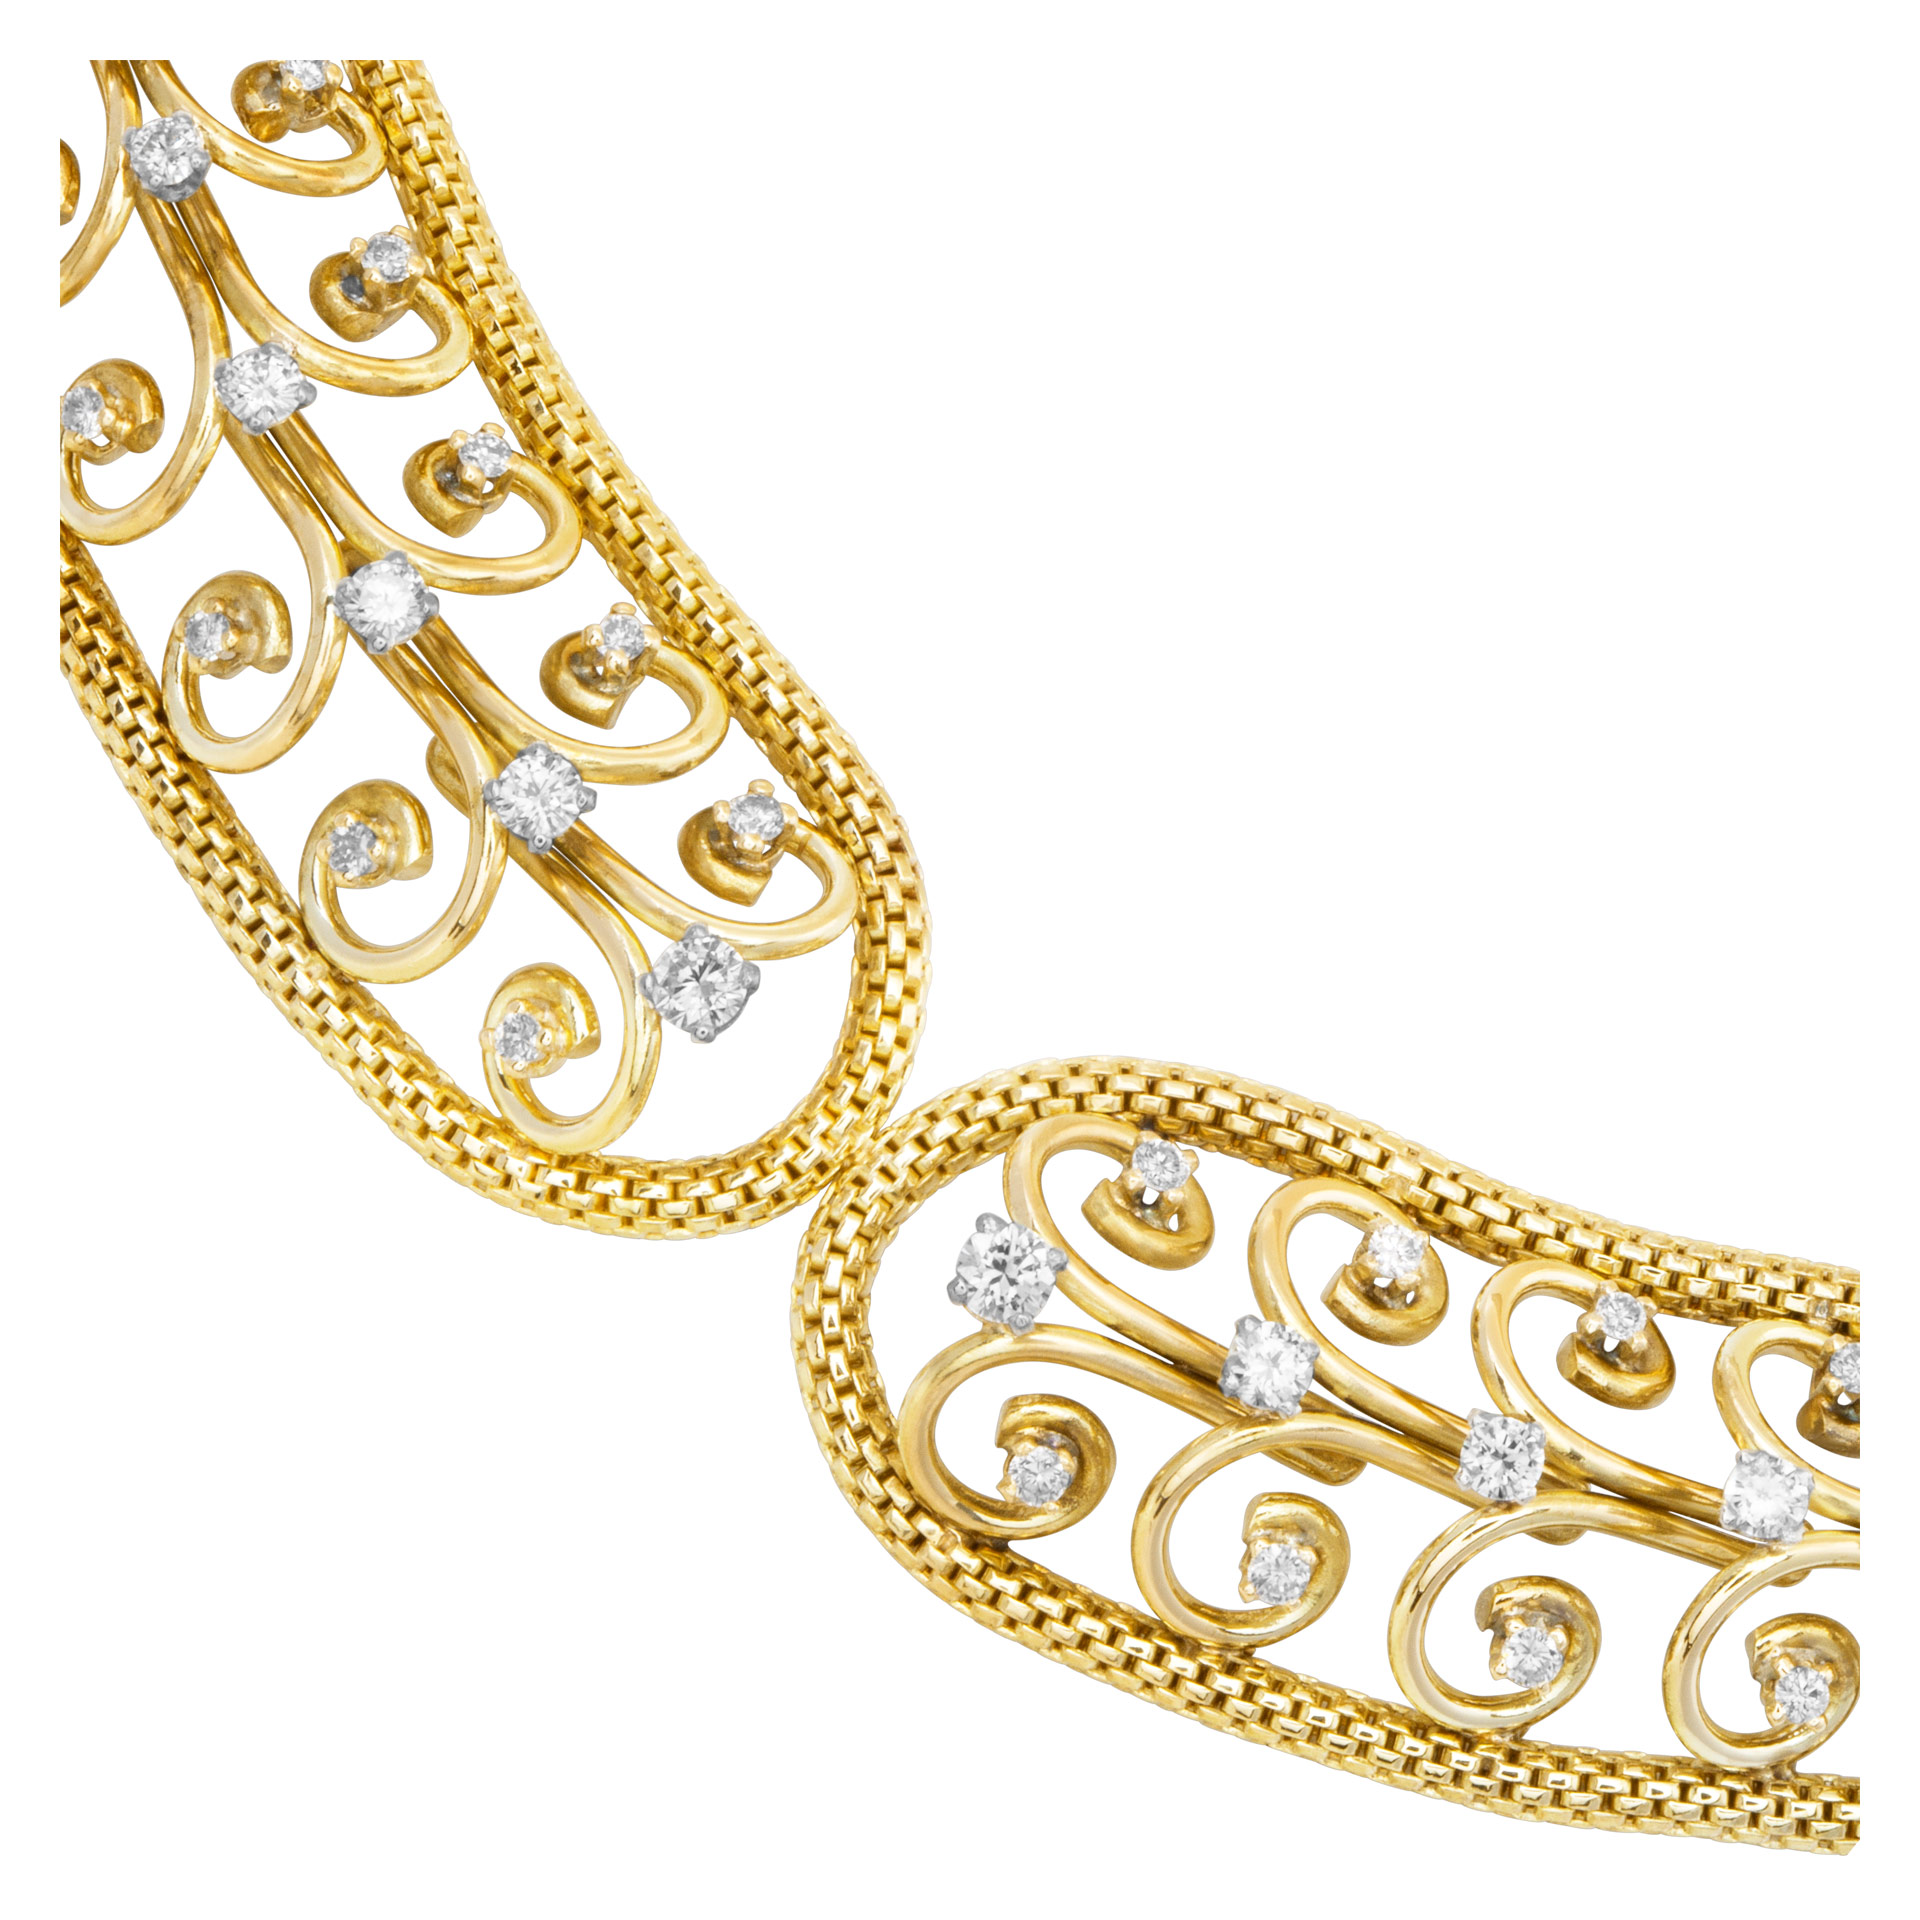 Swirl link choker necklace with diamond accents in 18k (Stones) image 2